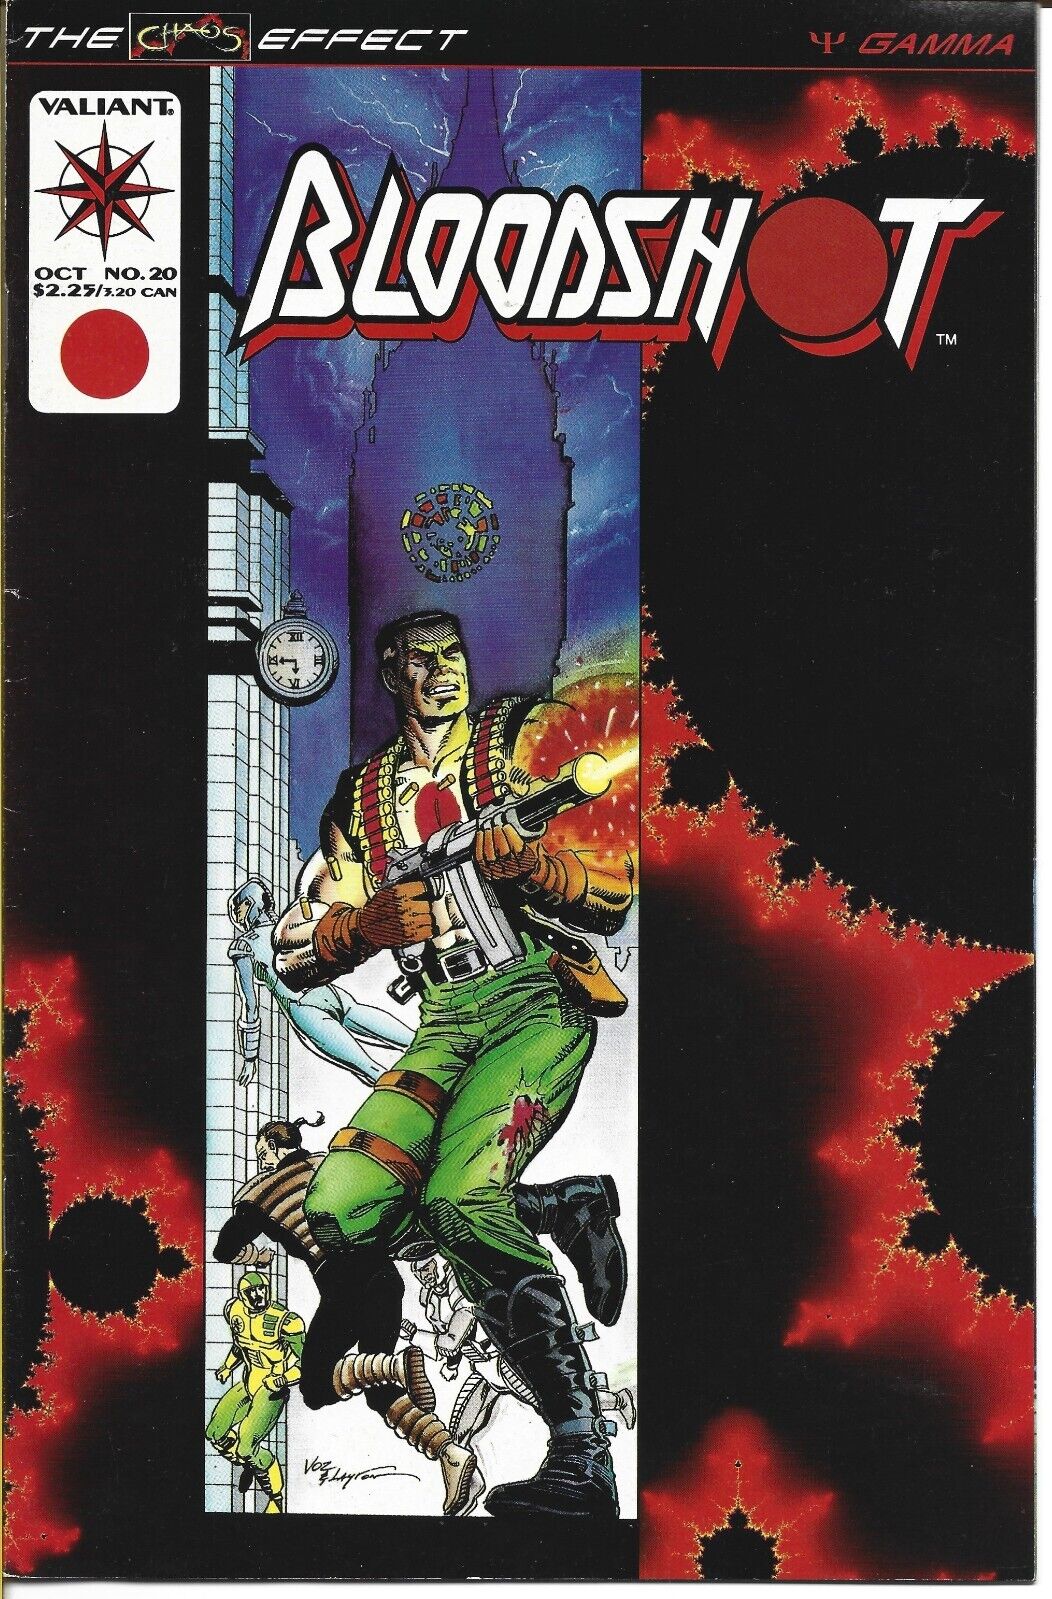 BLOODSHOT #20 VALIANT COMICS 1994 BAGGED AND BOARDED